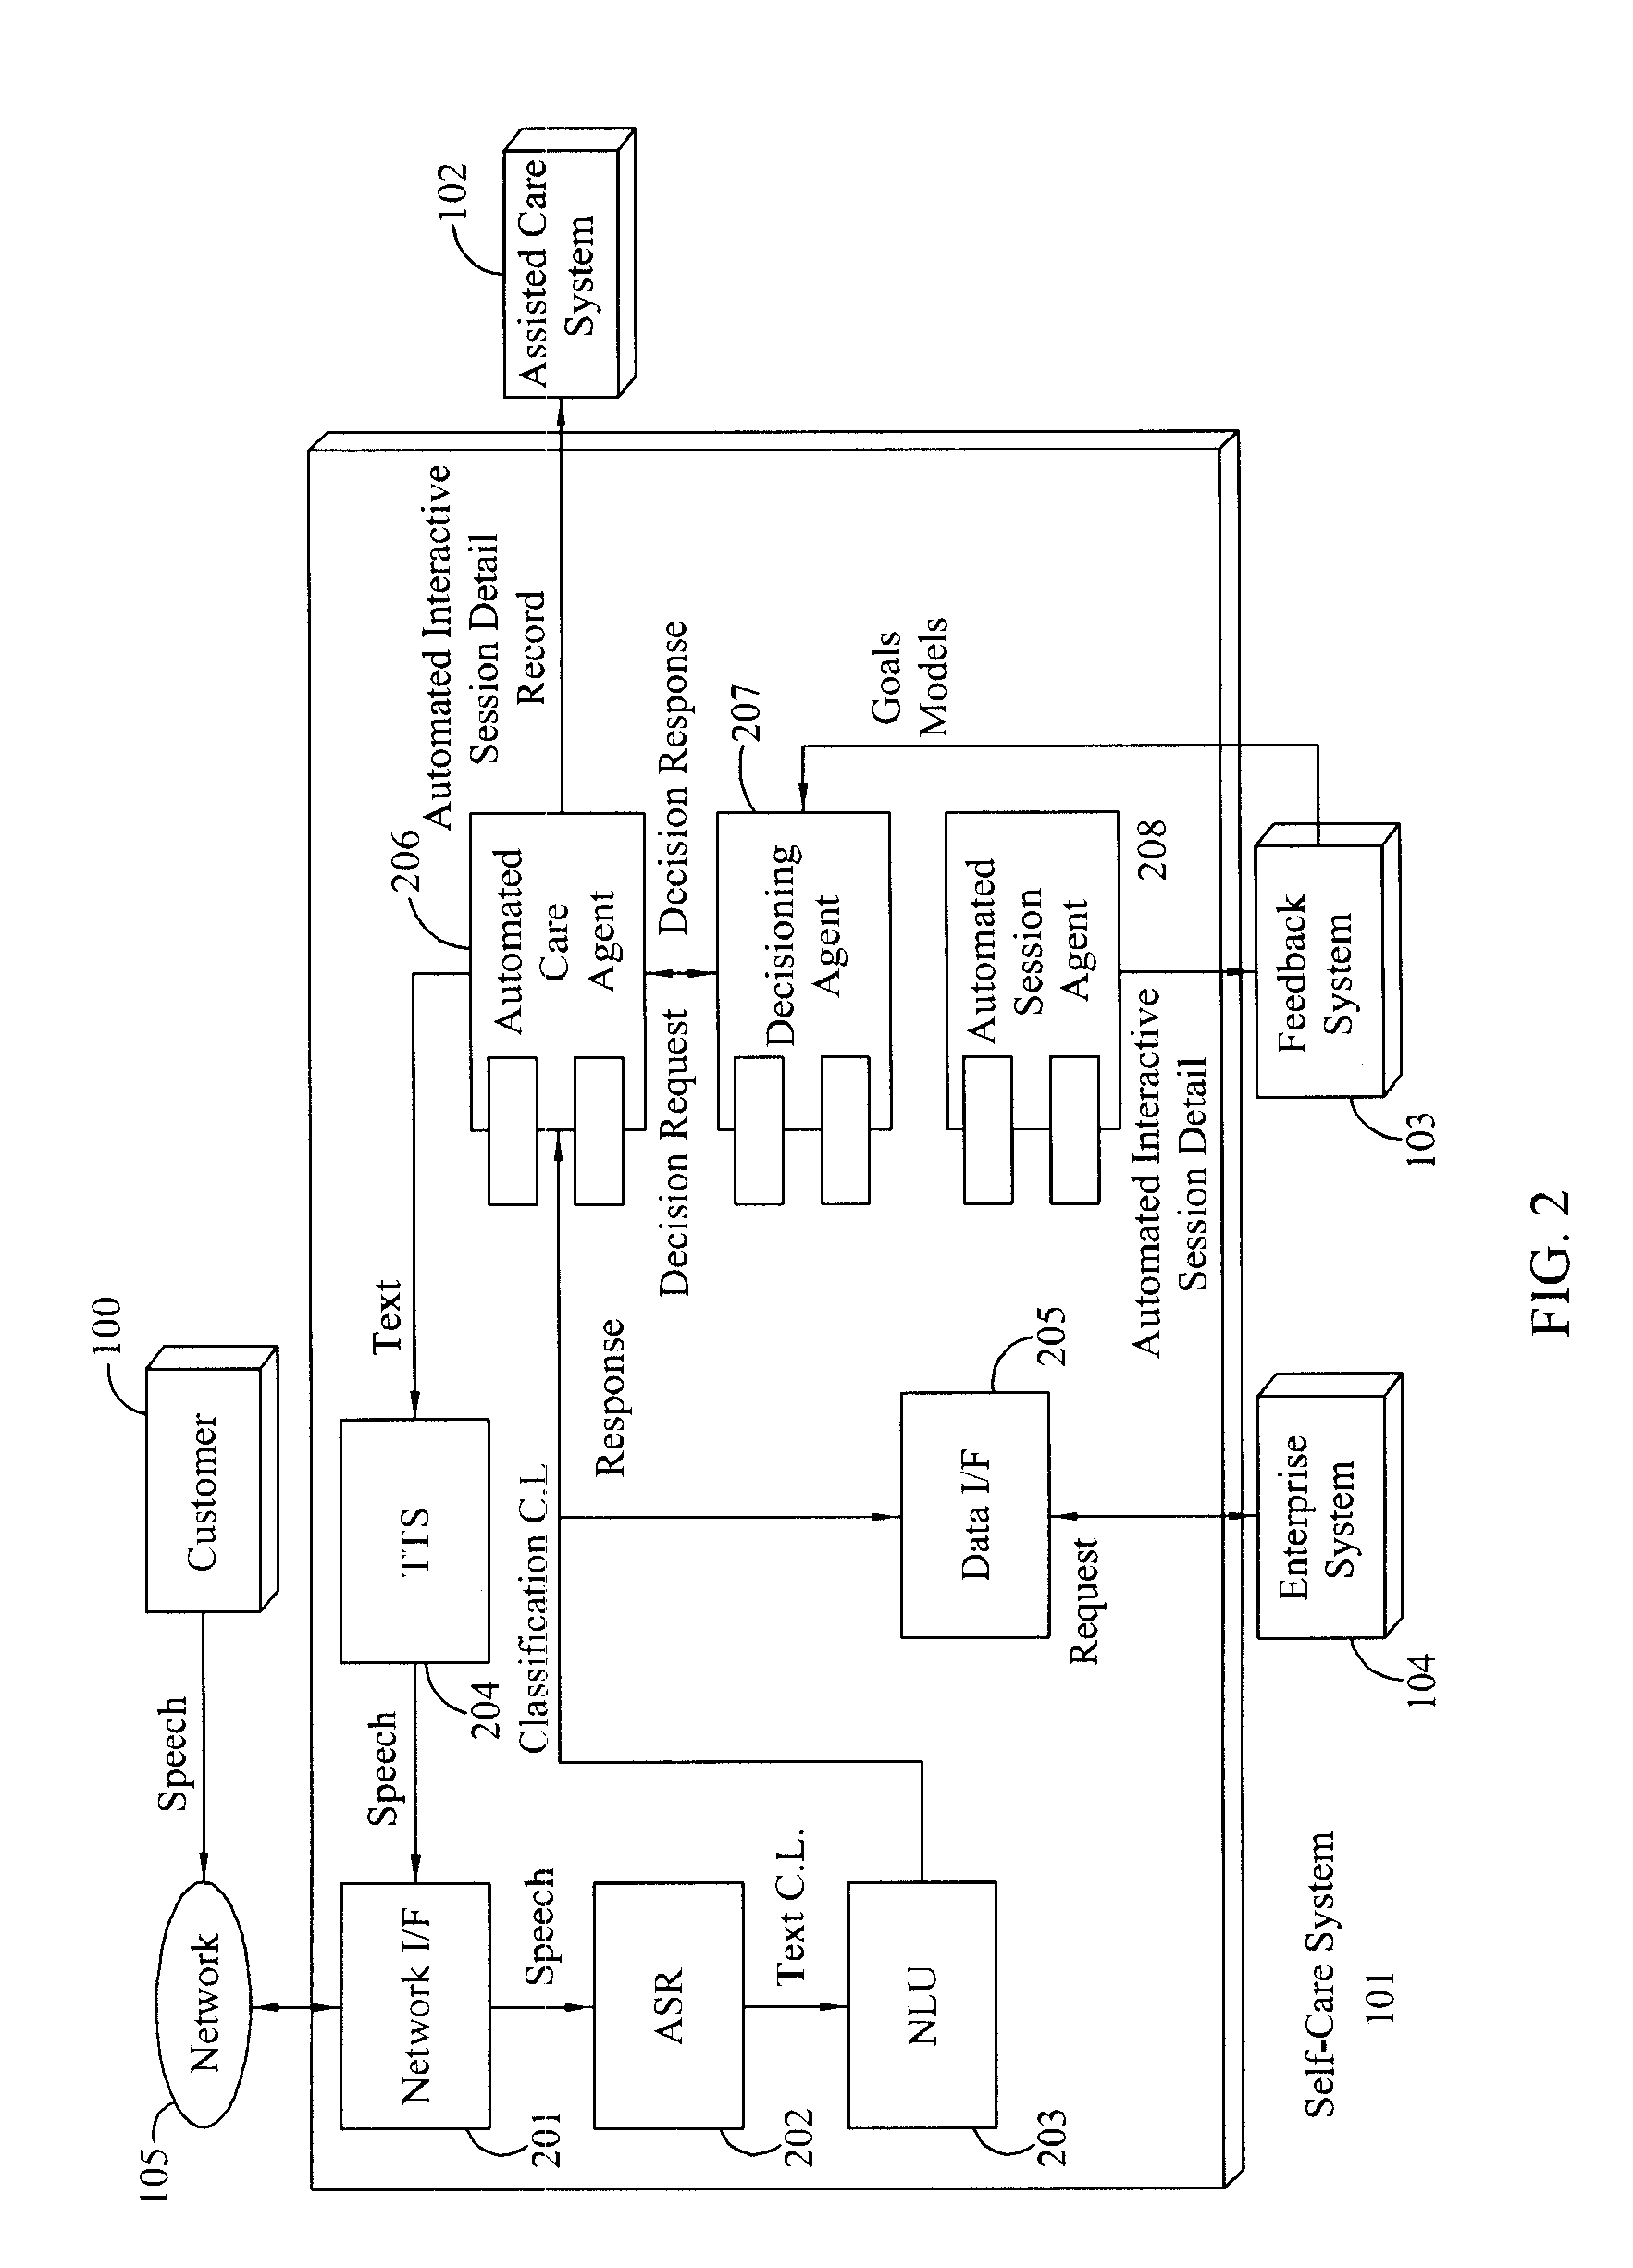 System and method for closed loop decisionmaking in an automated care system